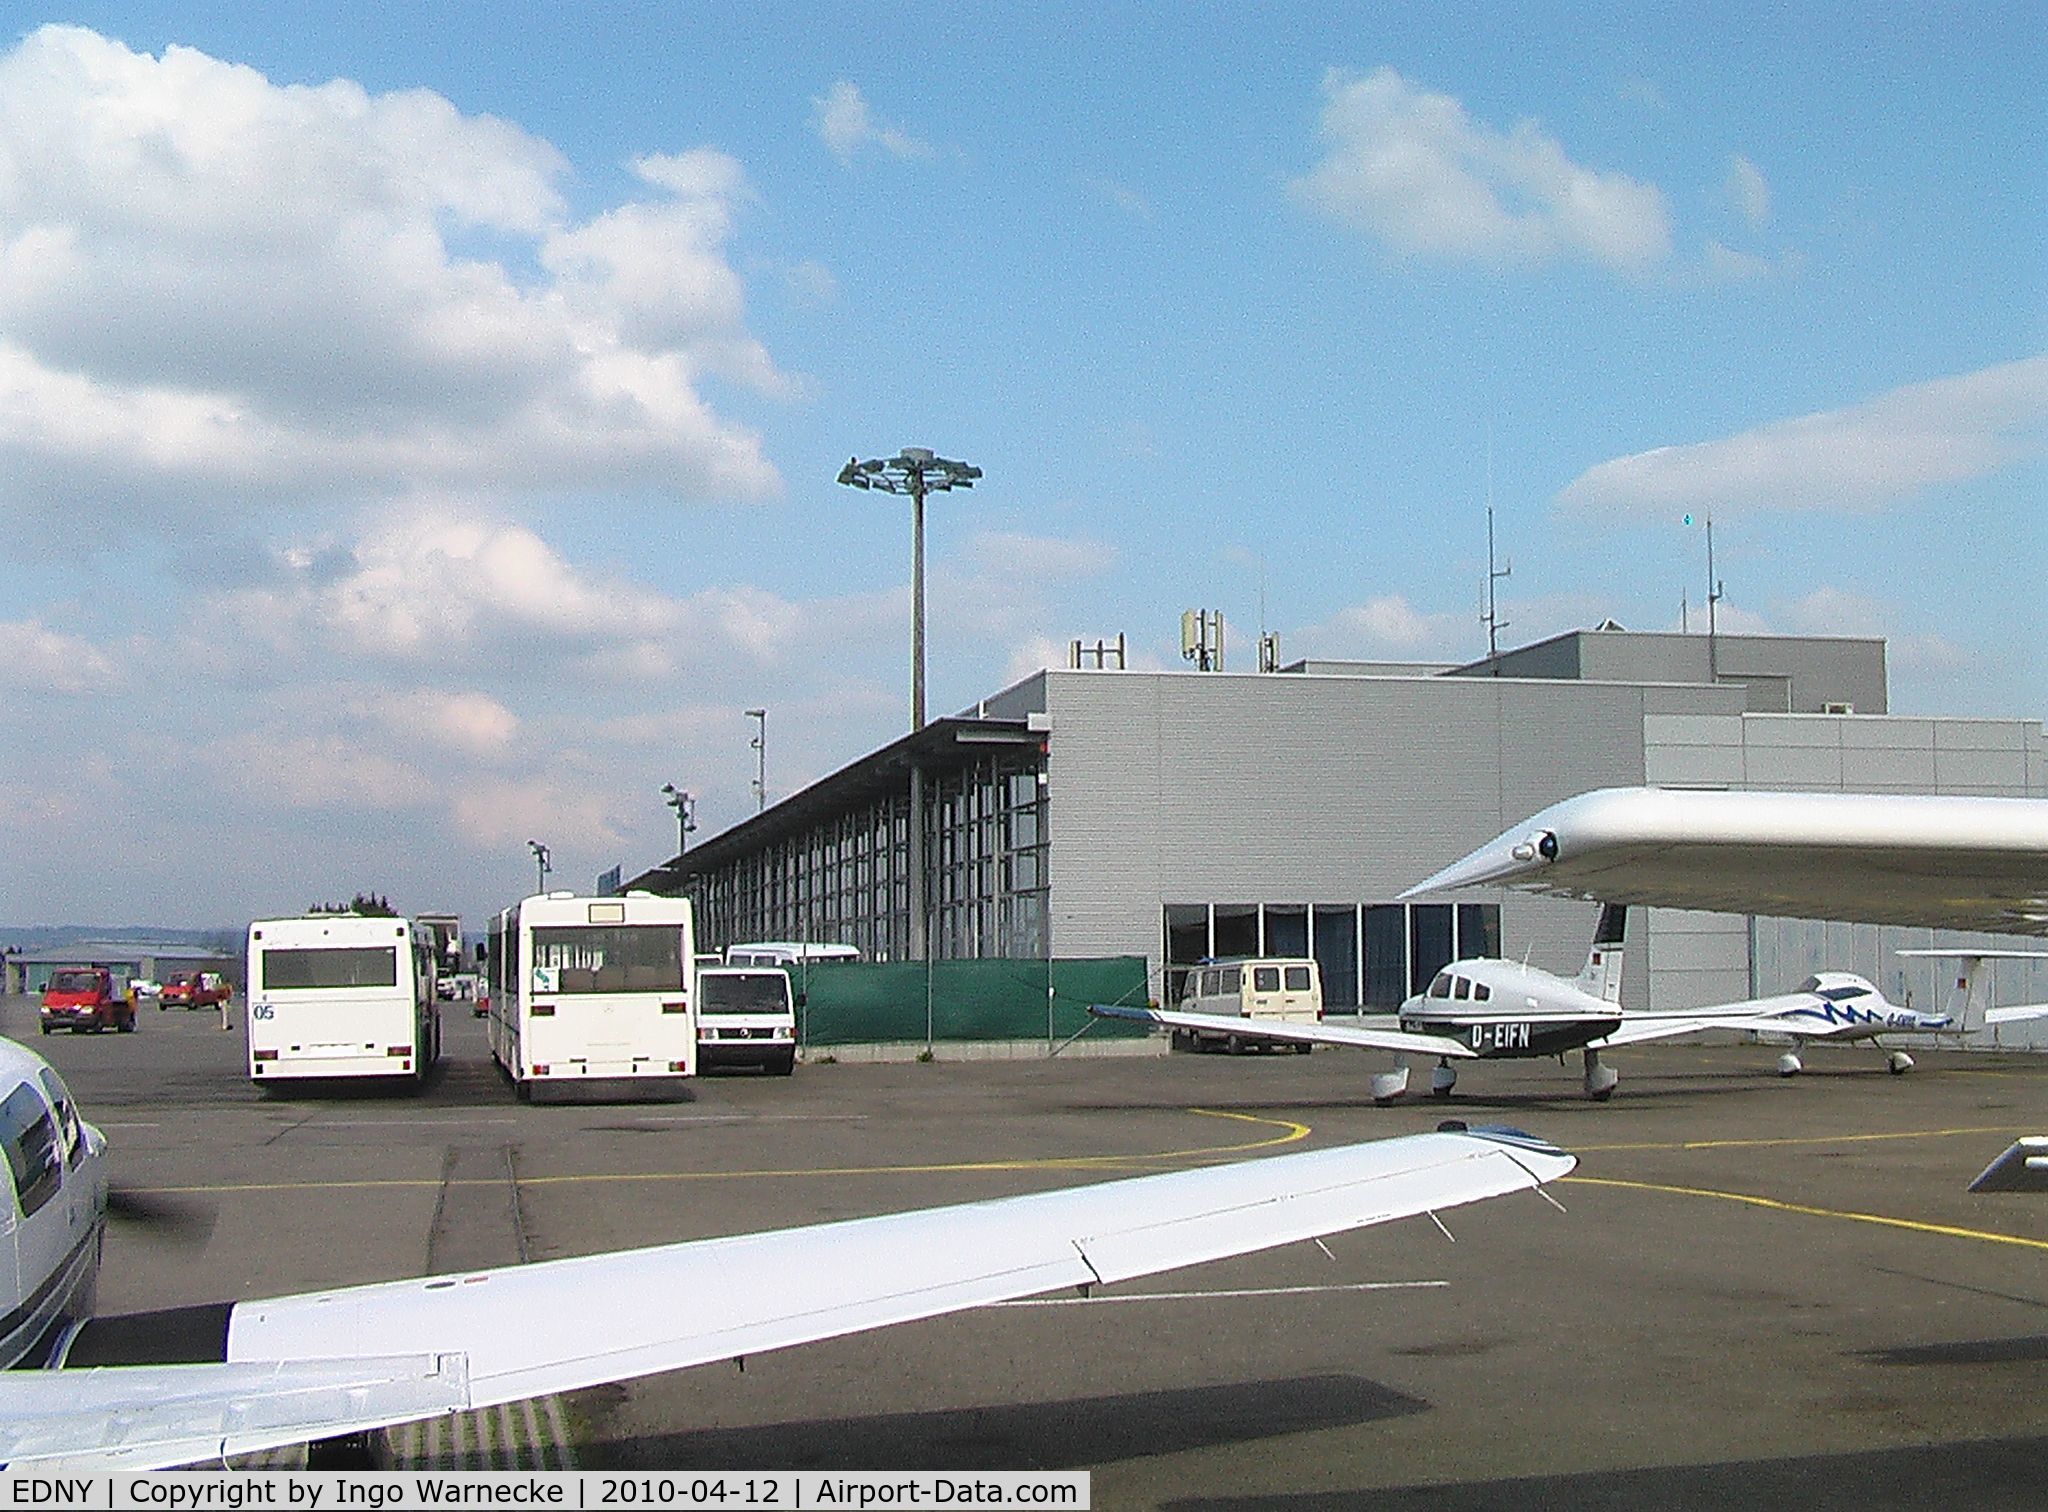 Bodensee Airport, Friedrichshafen Germany (EDNY) - new terminal building (airside)